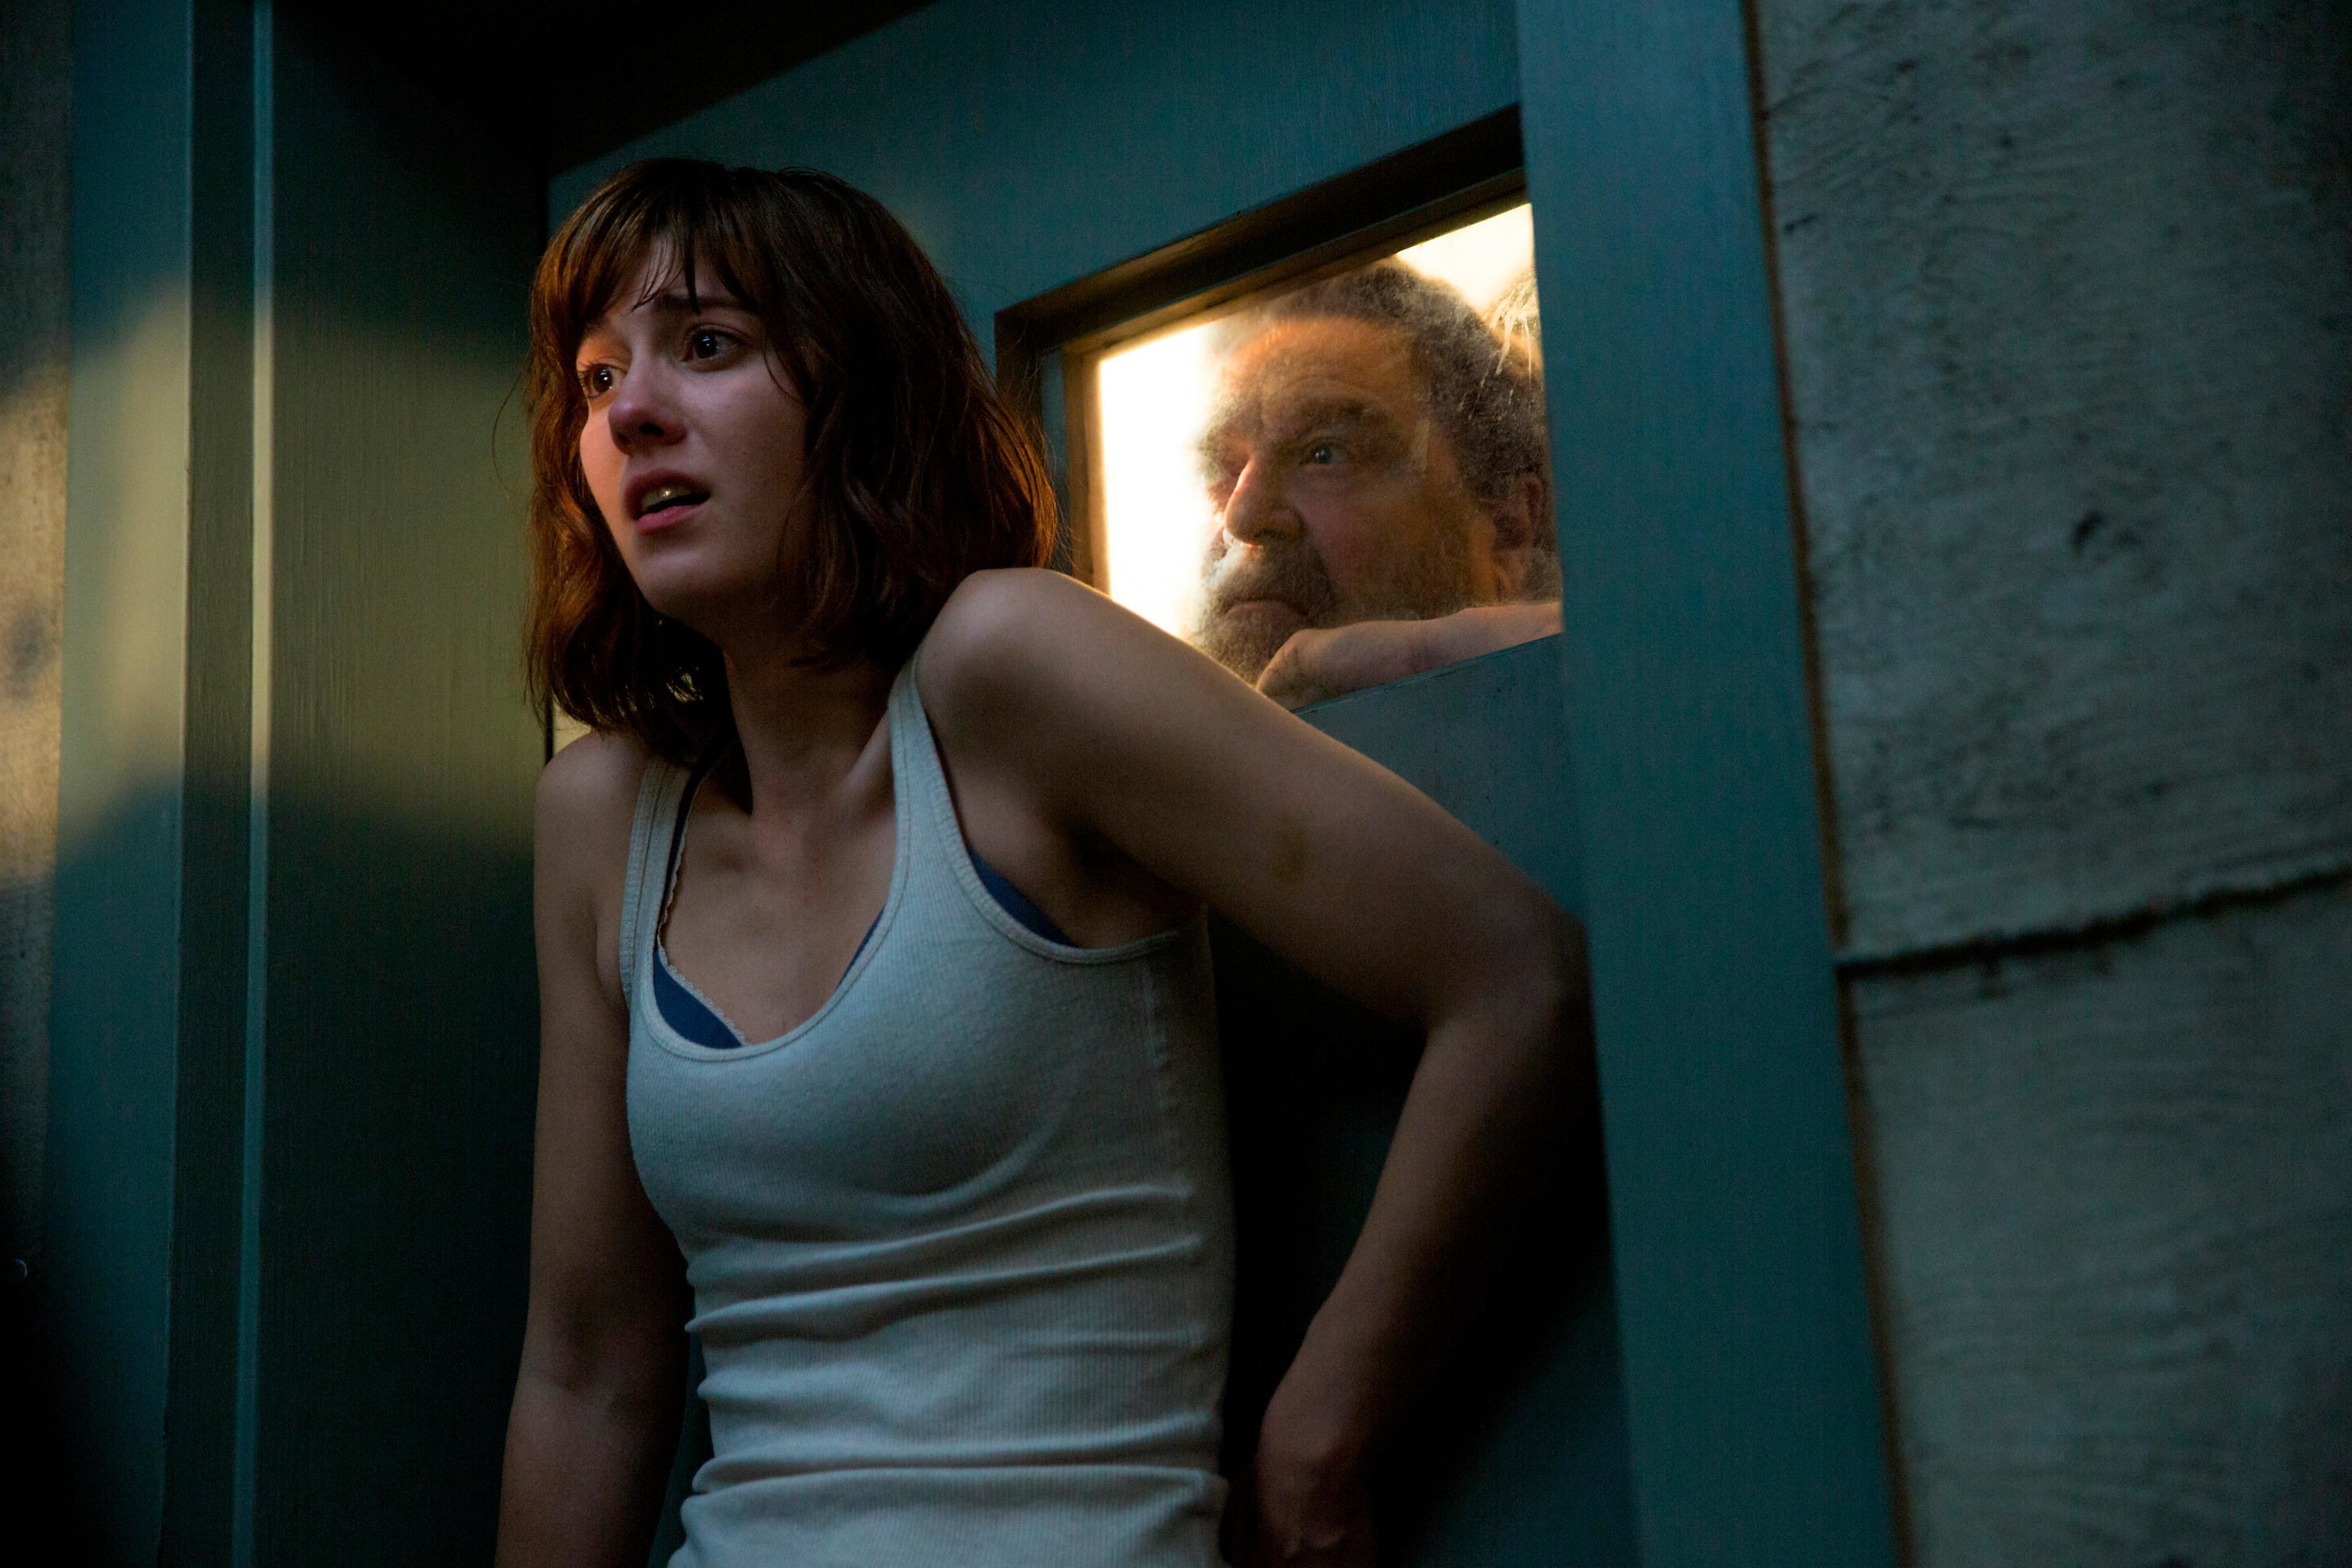 A terrified woman stares out of a vestibule with a man behind a steel door peering over her shoulder